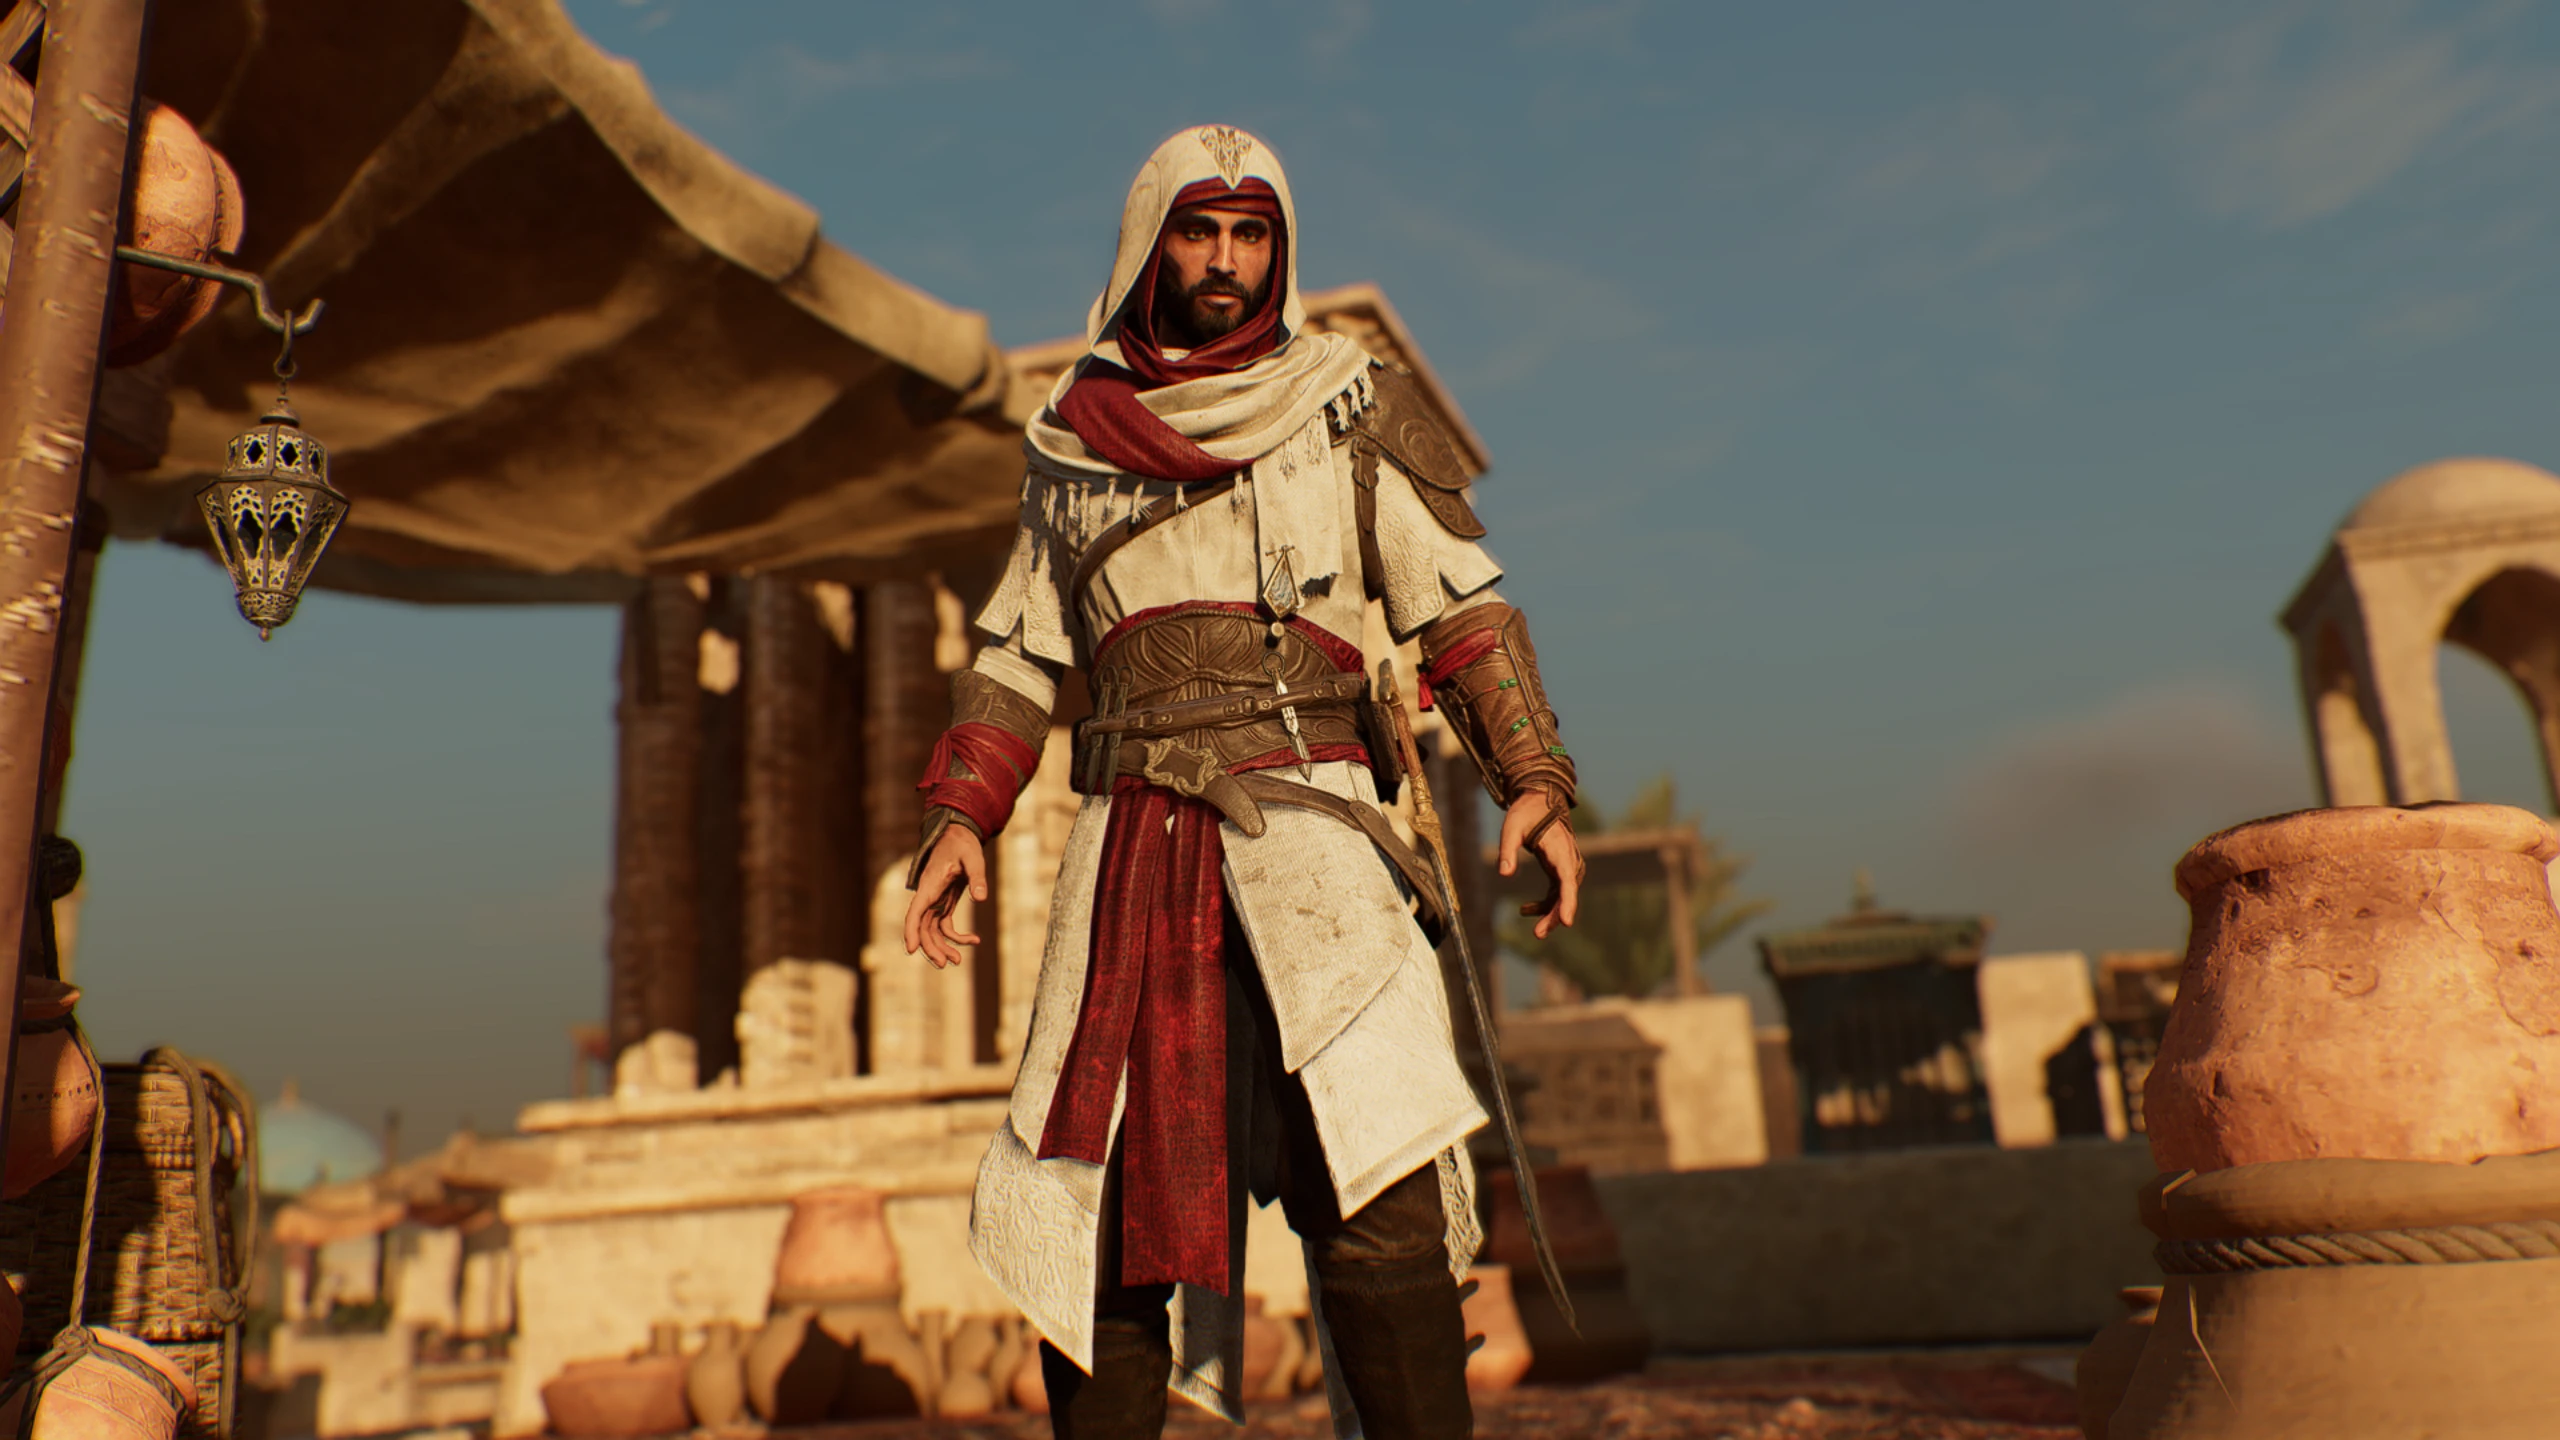 Top mods at Assassins Creed Nexus - Mods and community